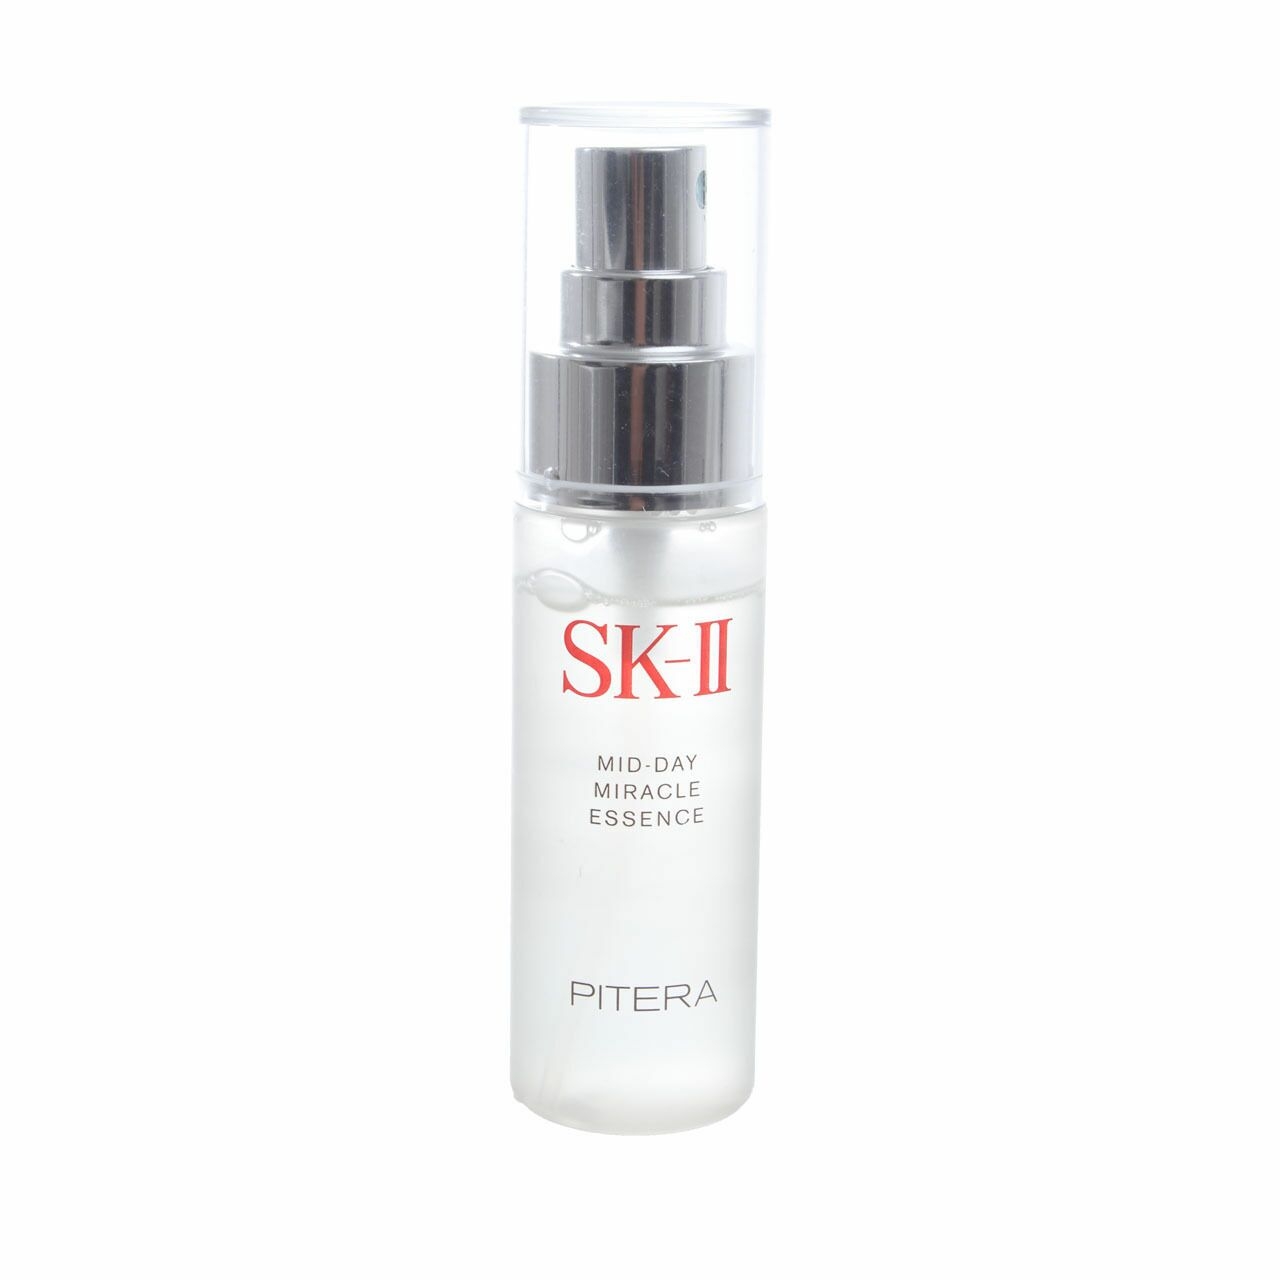 SK-II Mid-Day Miracle Essence Pitera Skin Care